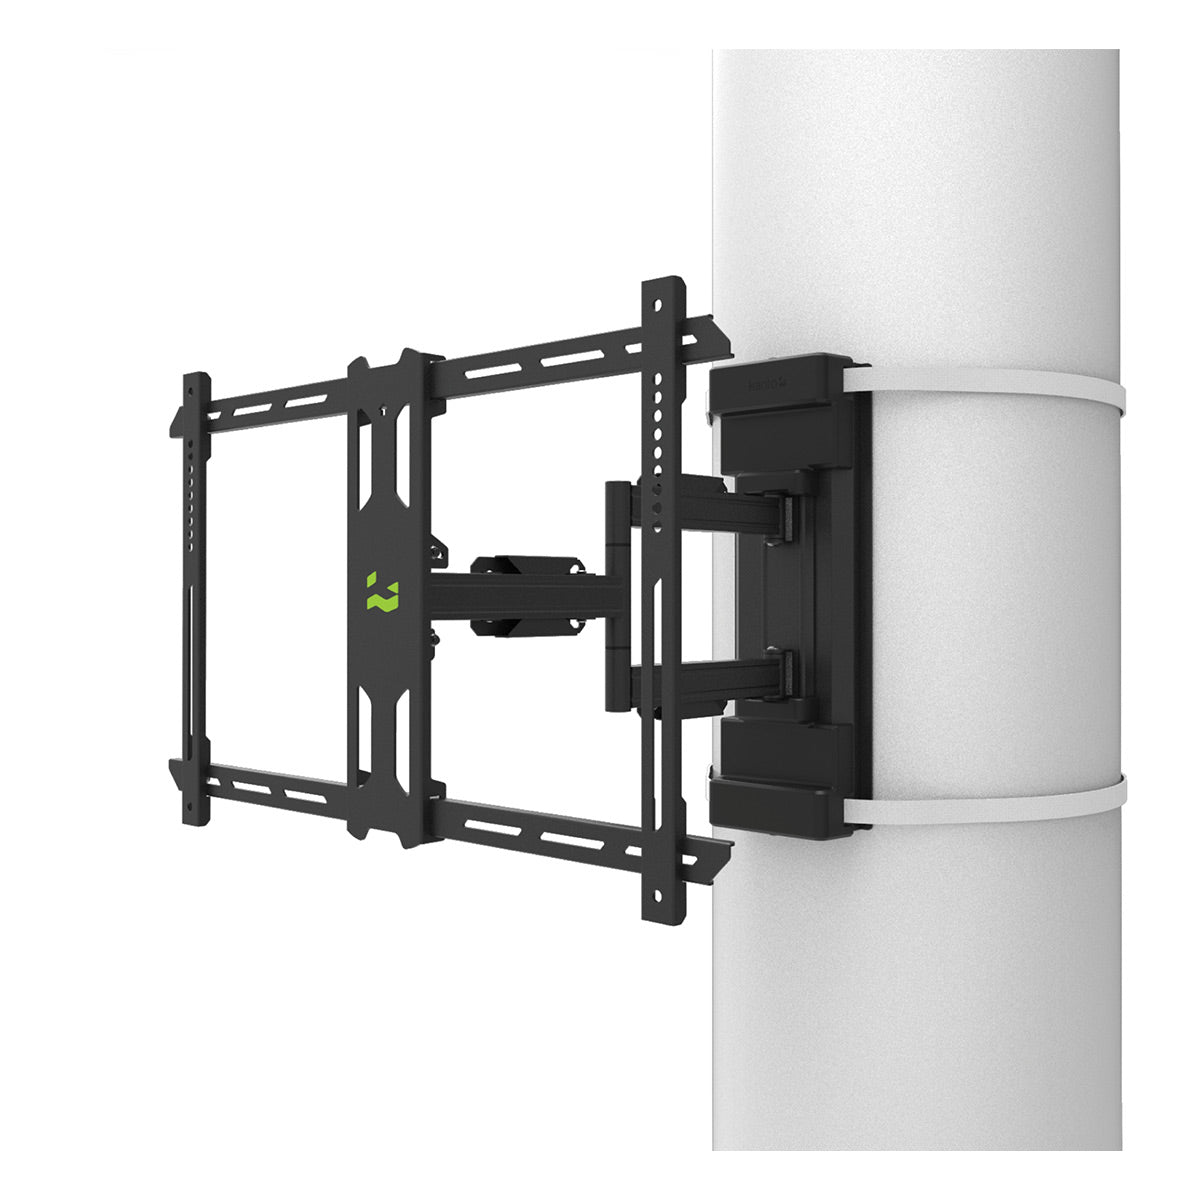 Photos - Mount/Stand Kanto PSC350 No Drill Full-Motion Column and Pillar Wrapping TV Mount for 